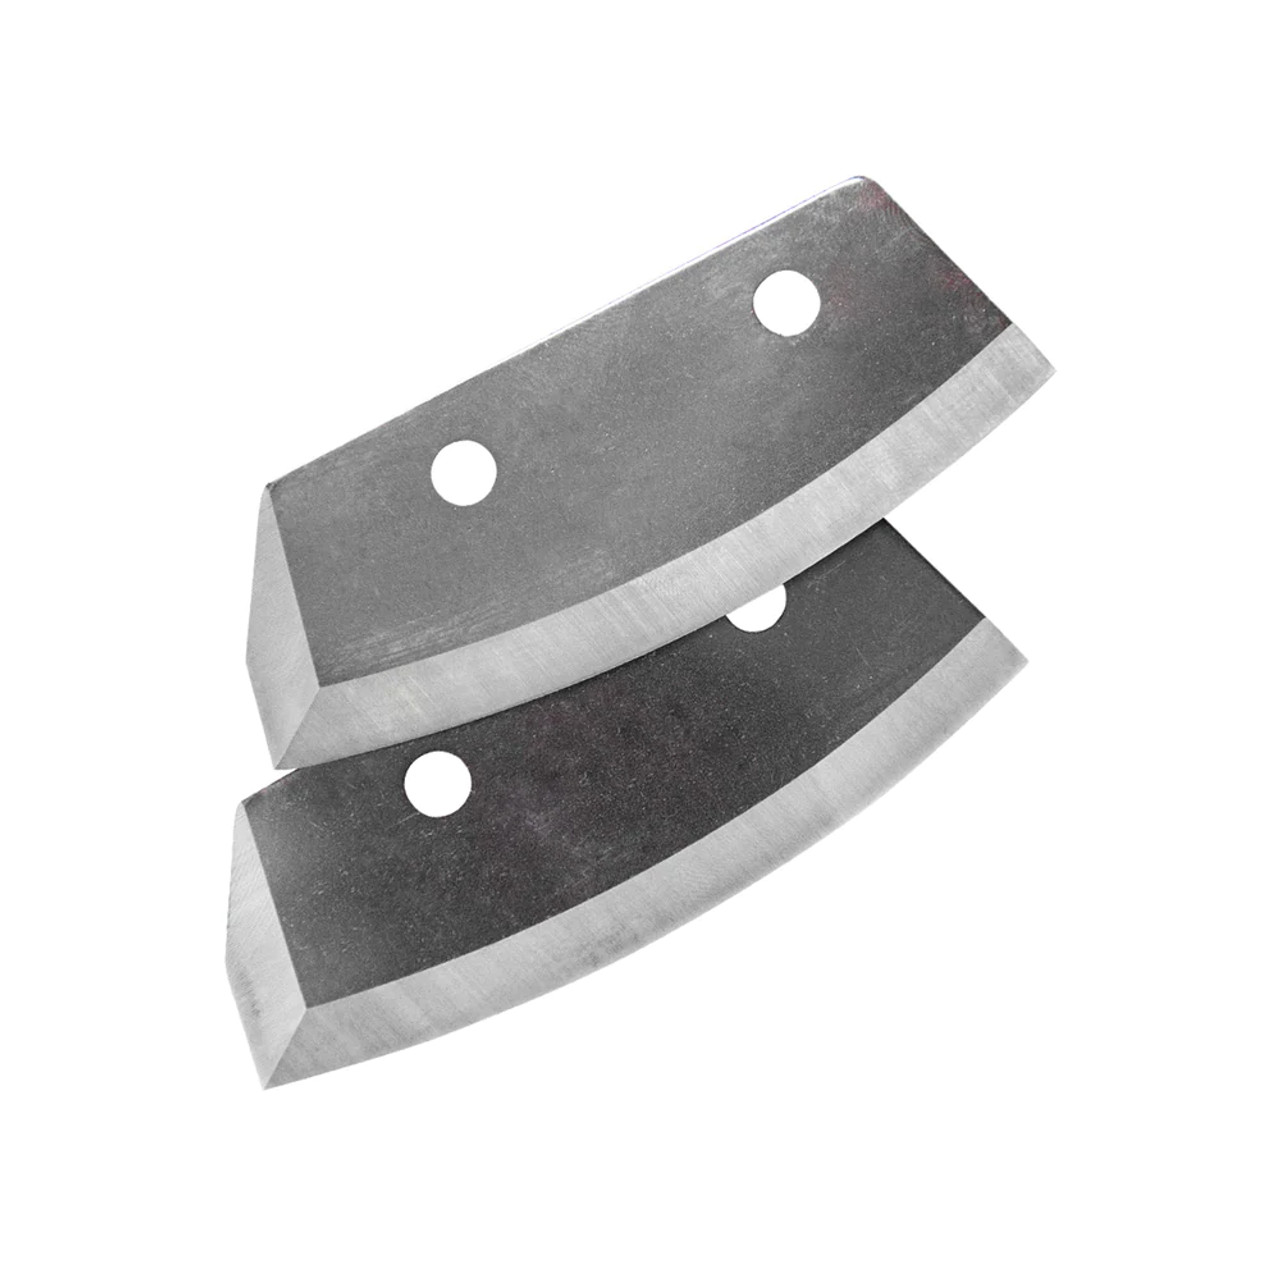 Ion Alpha Replacement Blades 8", Fits Gen 3 Alpha Series Models, Stainless Steel, Mounting Hardware Included